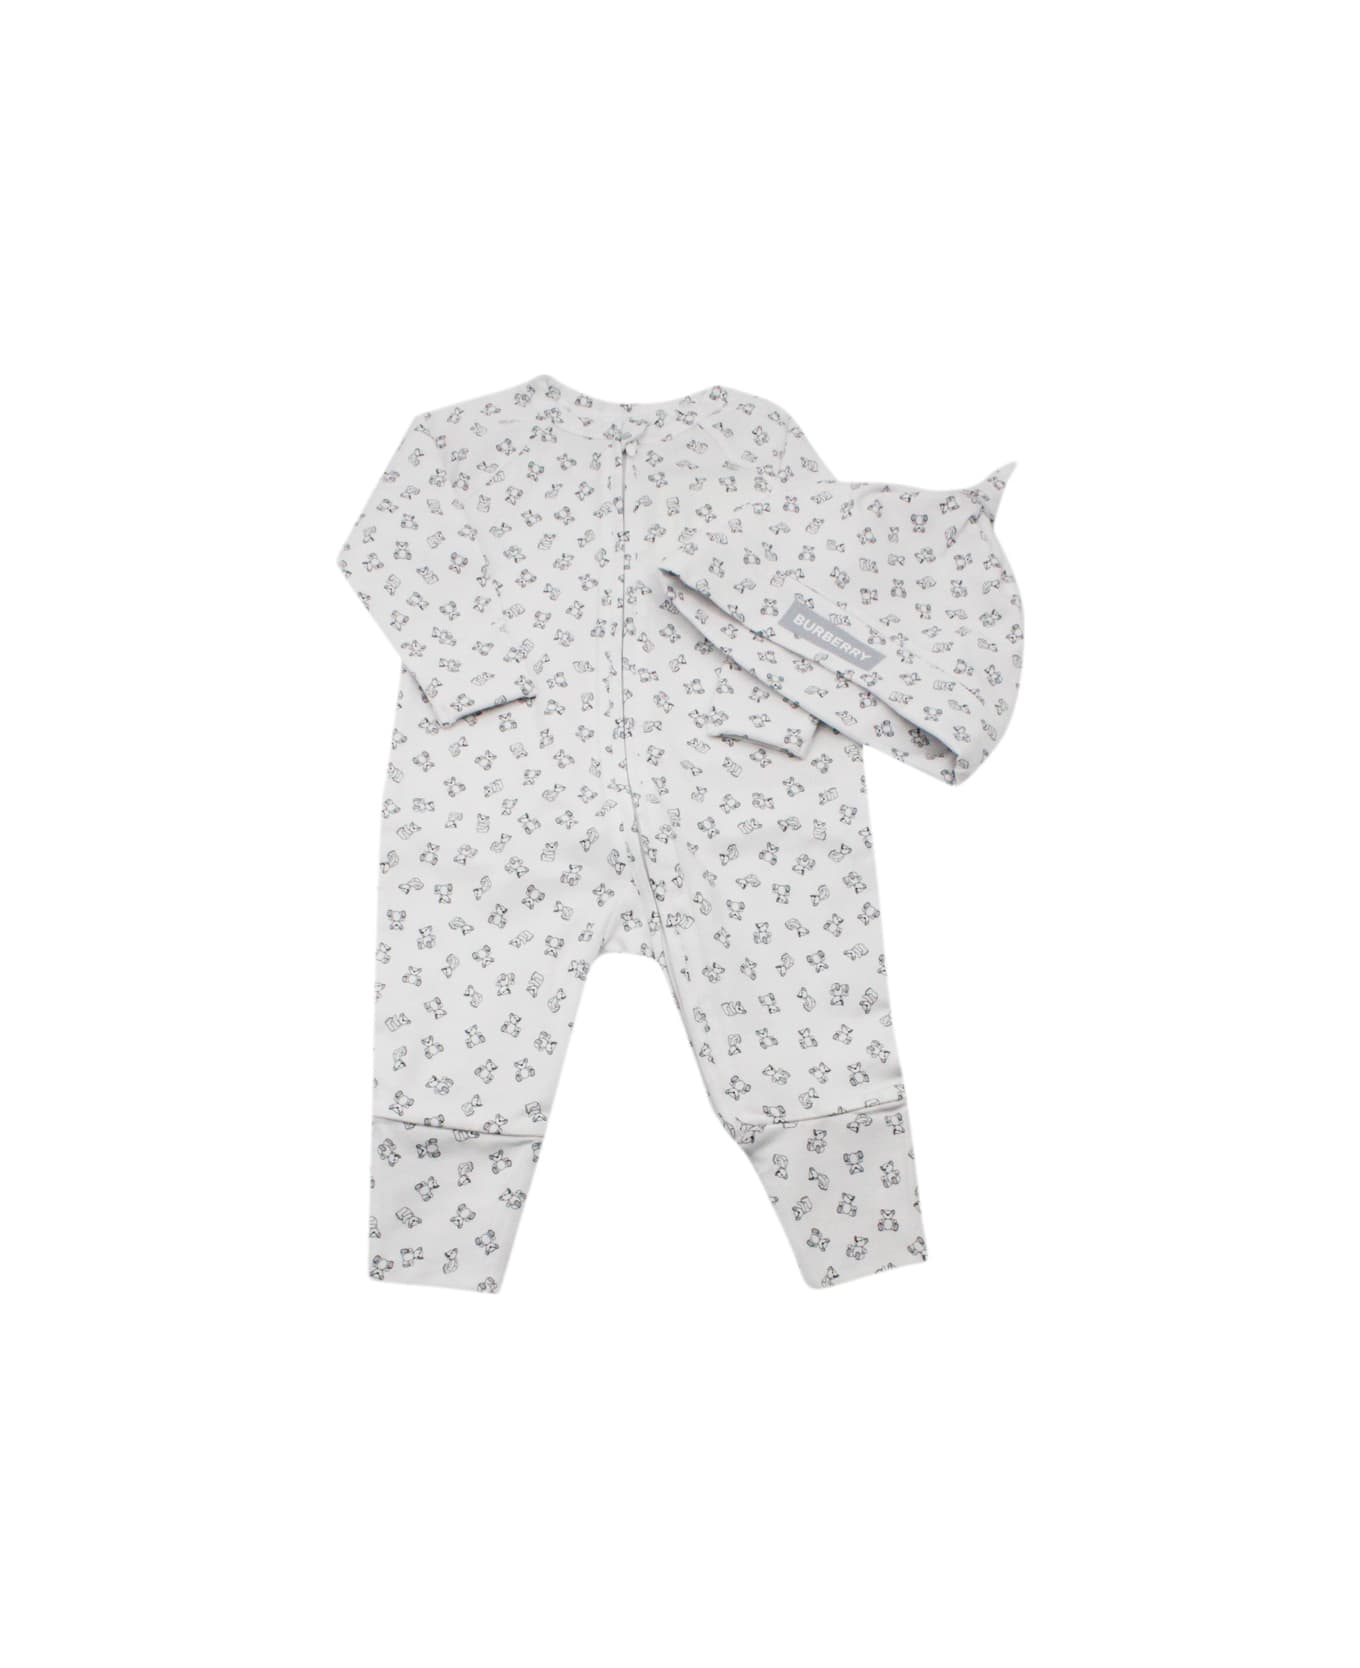 Burberry Complete Gift Set Consisting Of Onesie + Cotton Cap With Thomas Teddy Bear Print - White